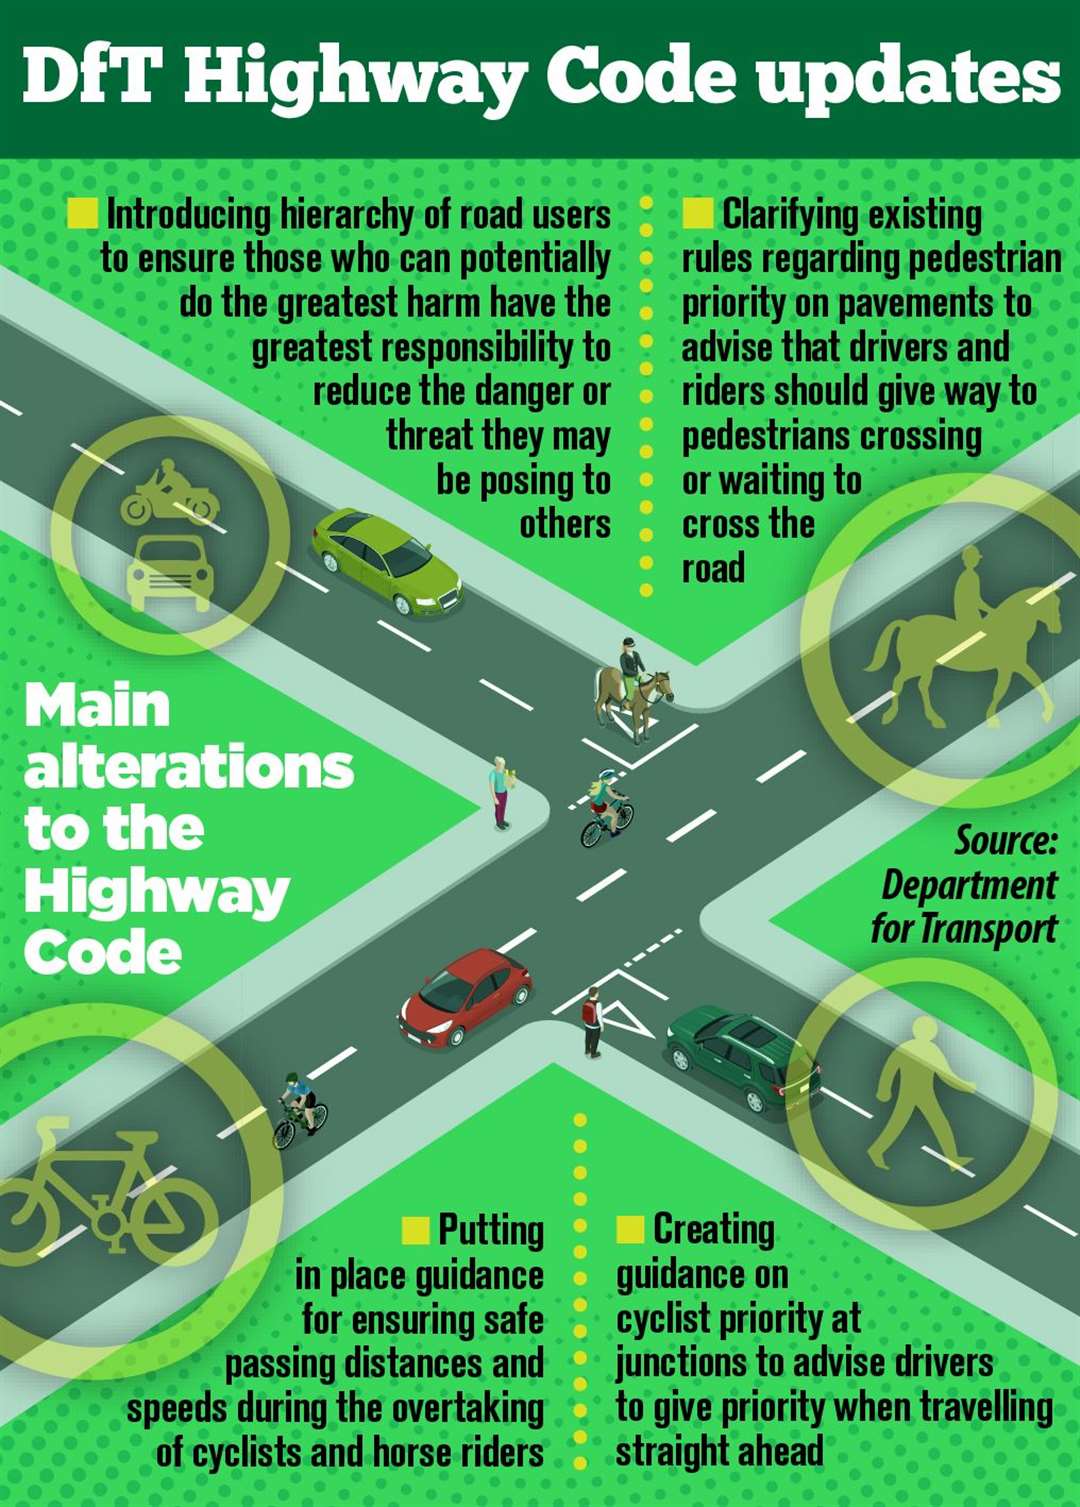 Highway Code changes for 2022 will create a hierarchy of road users